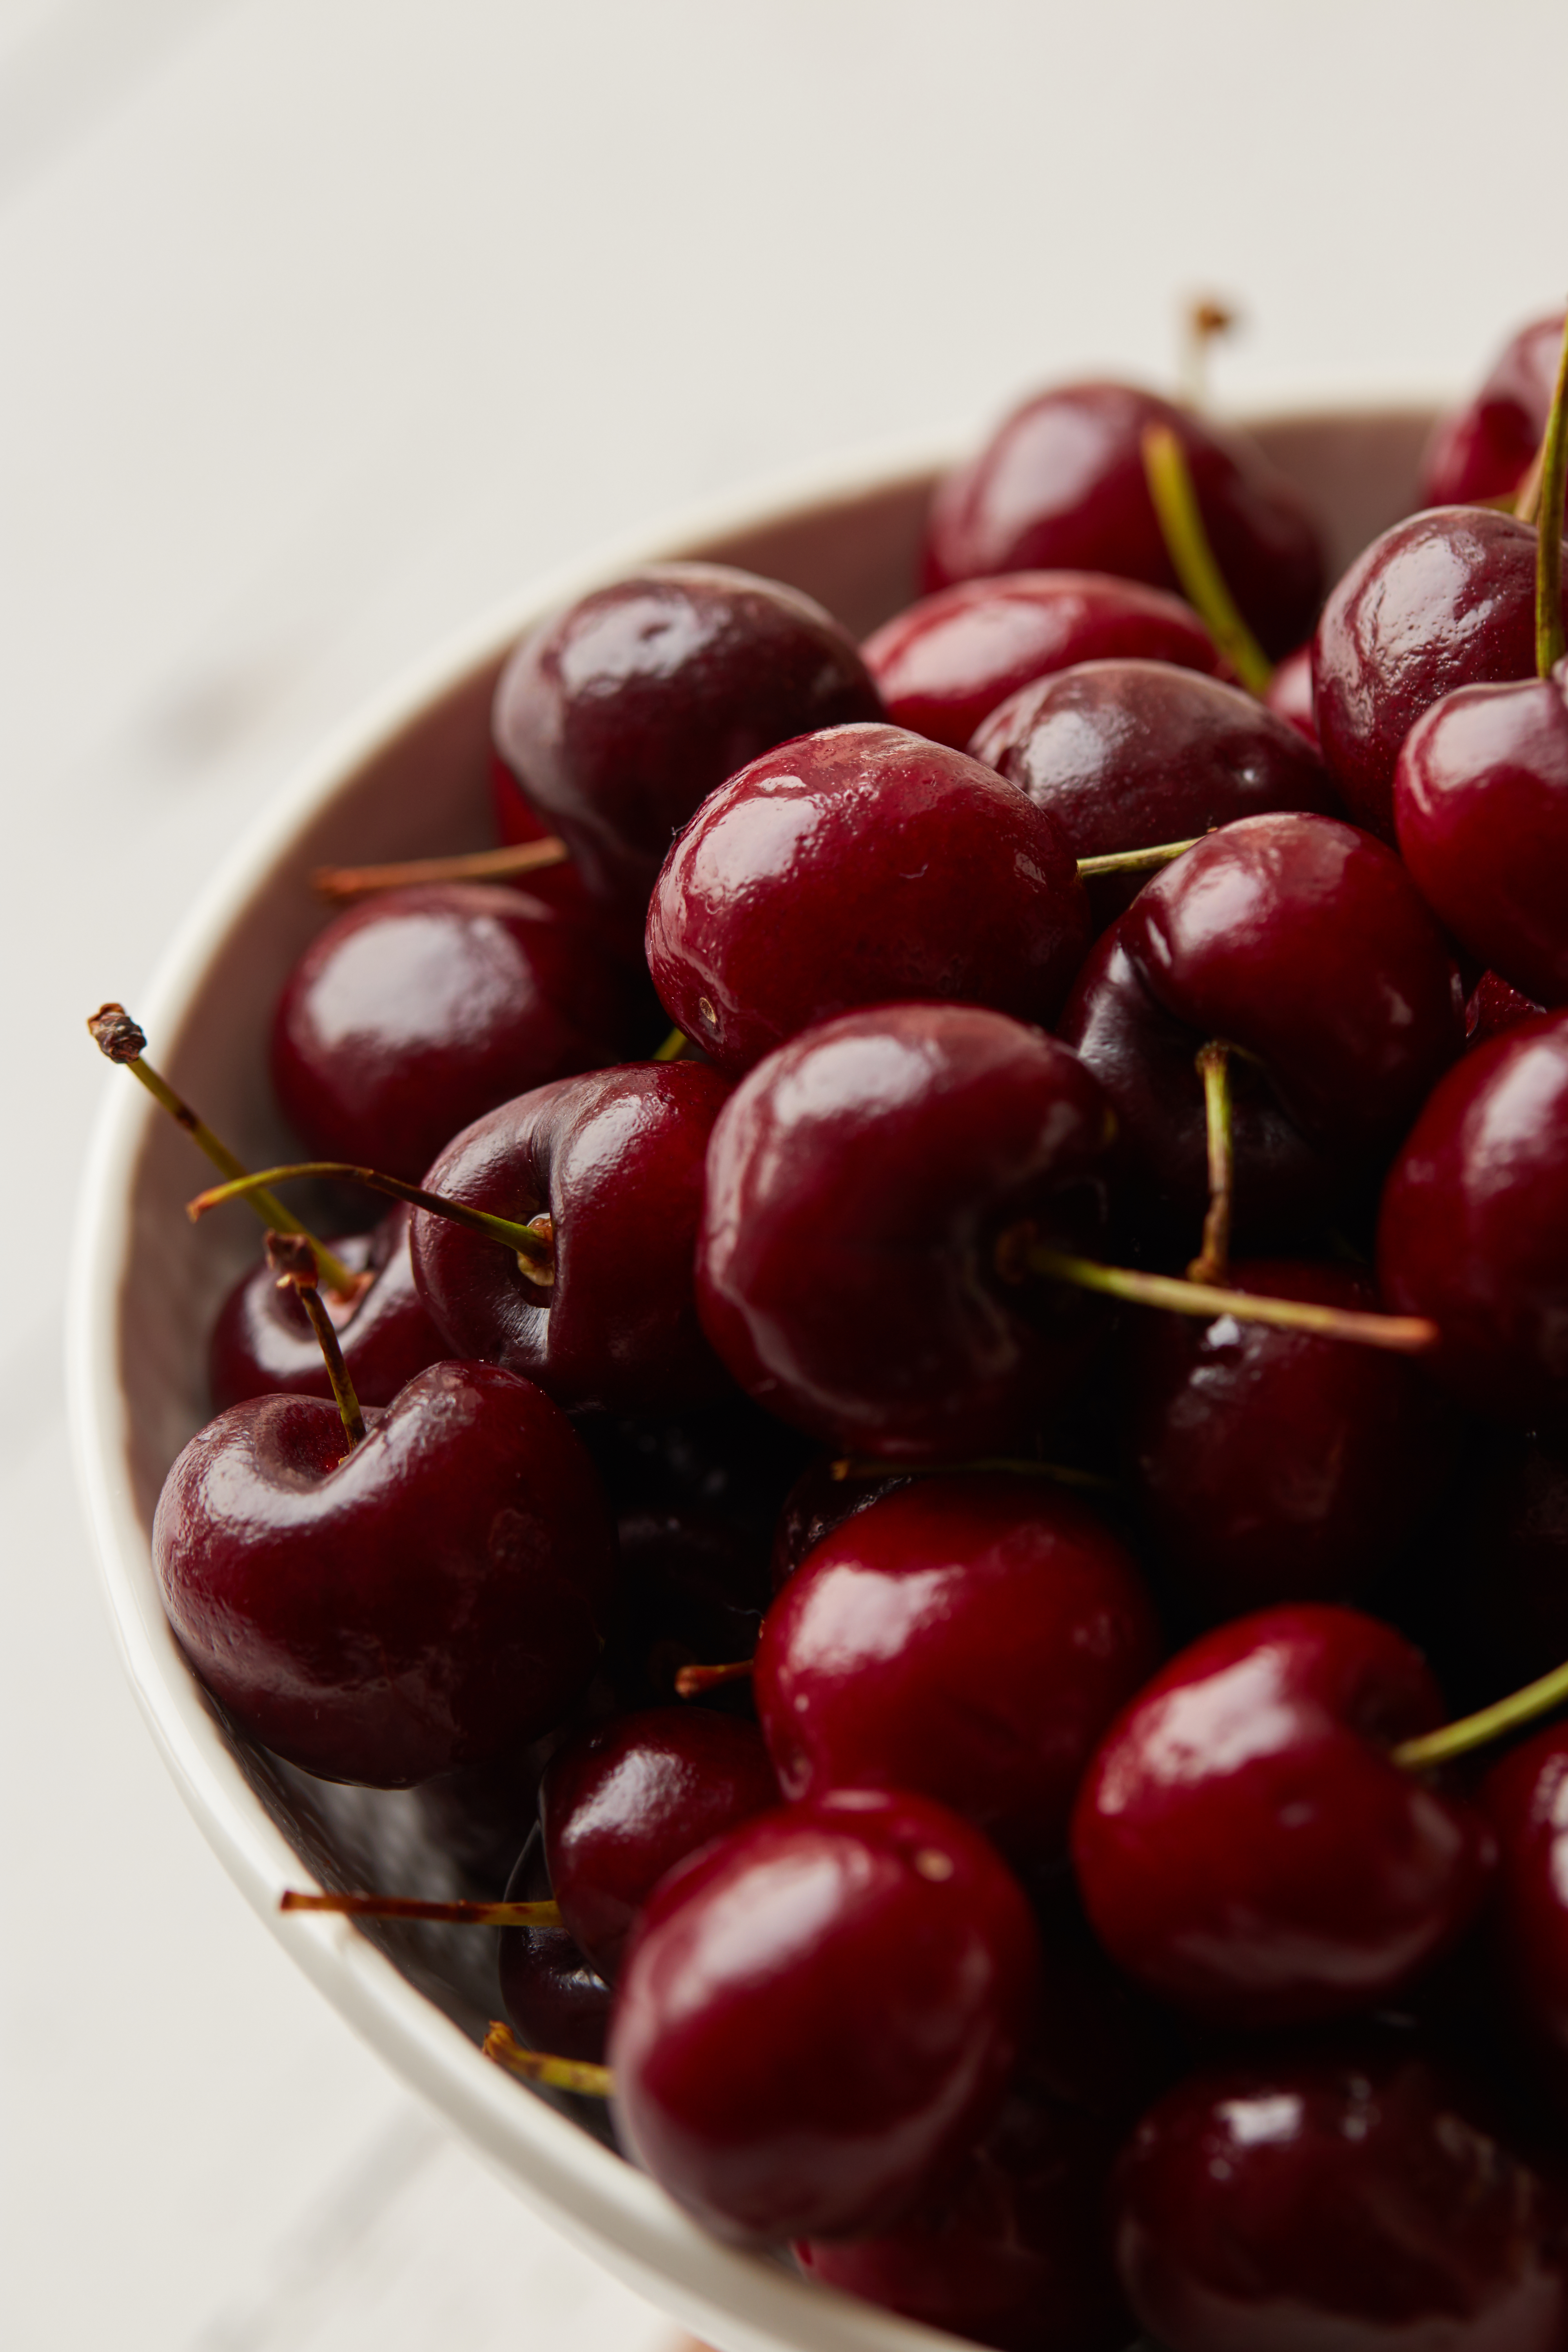 80054 download wallpaper food, berries, red, ripe, cherries screensavers and pictures for free